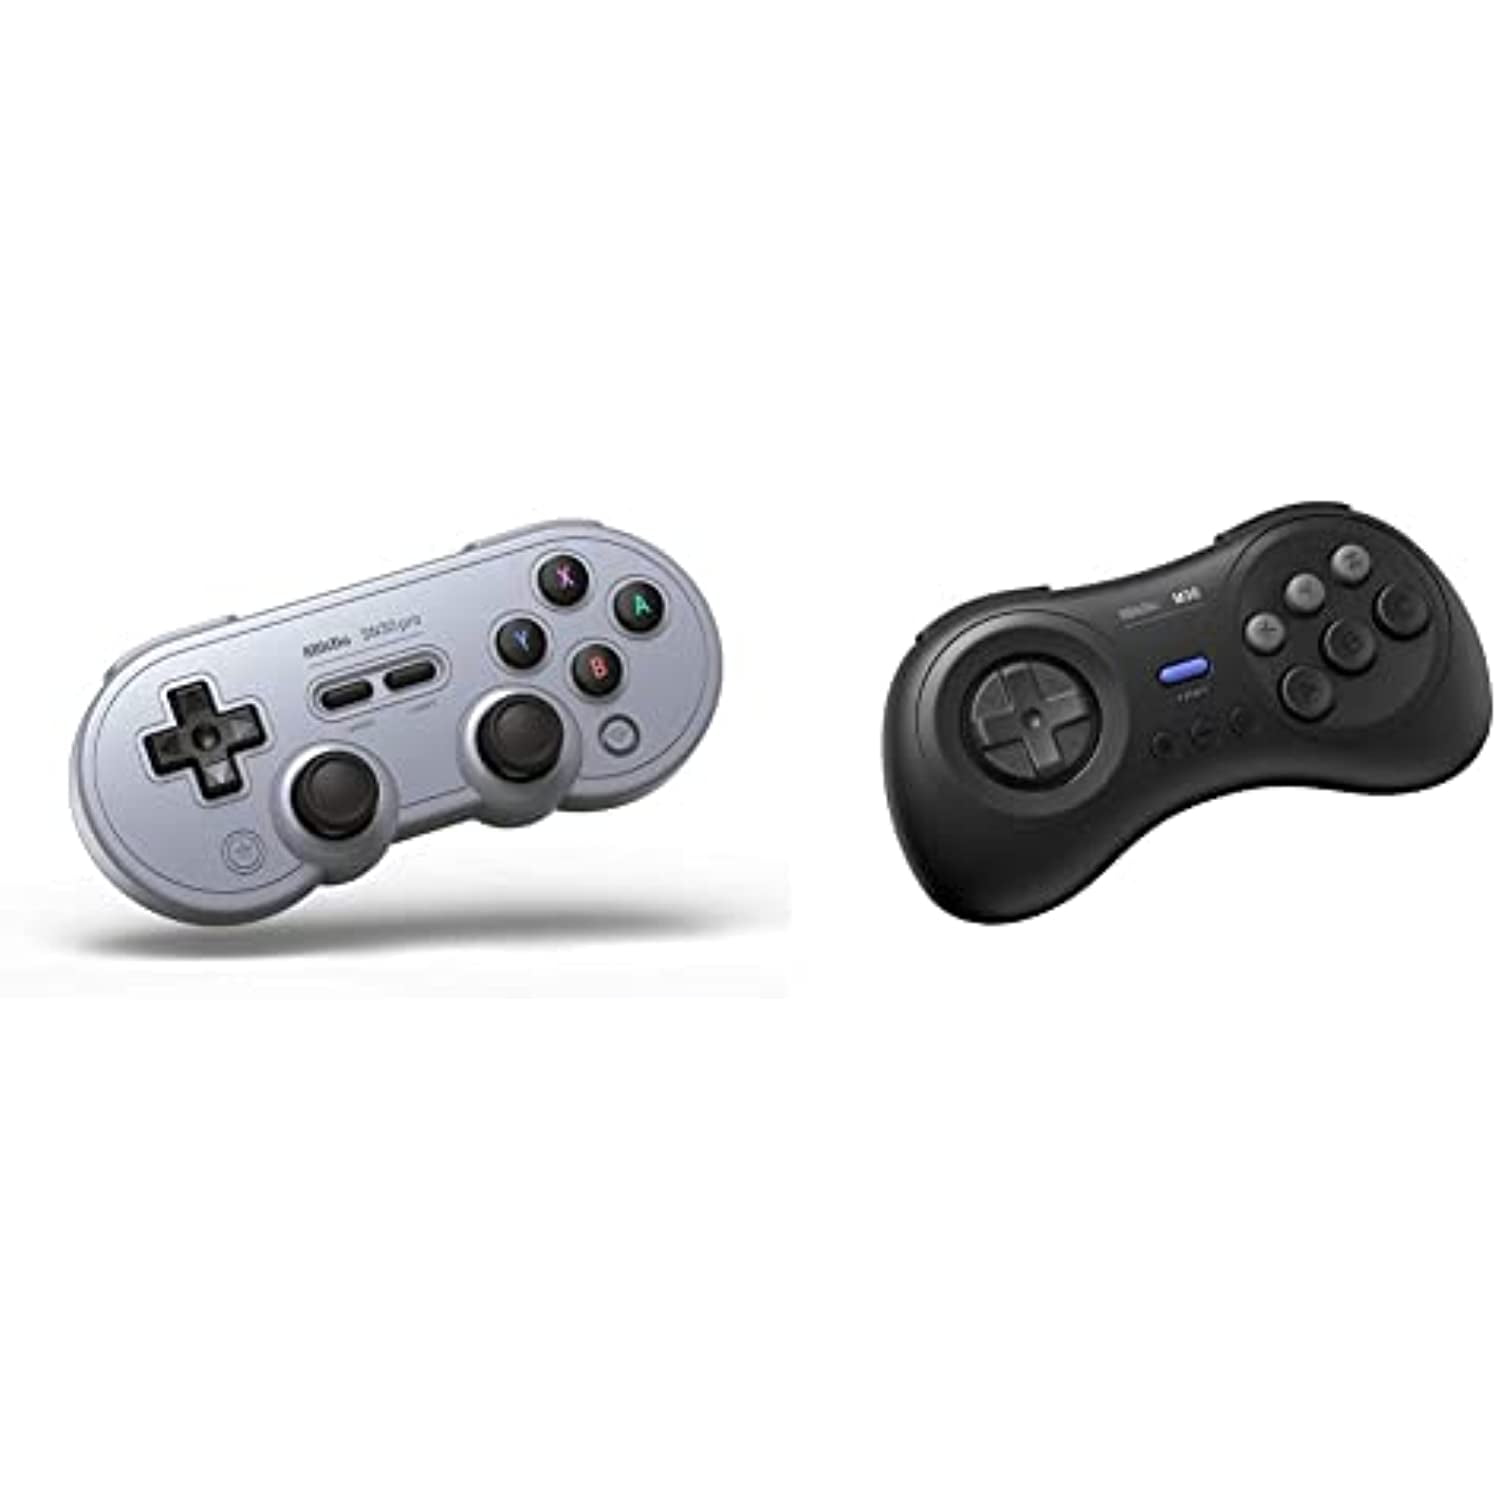 8Bitdo SN30 Pro Gamepad for PC, Mac, Android, SW - Bitcoin